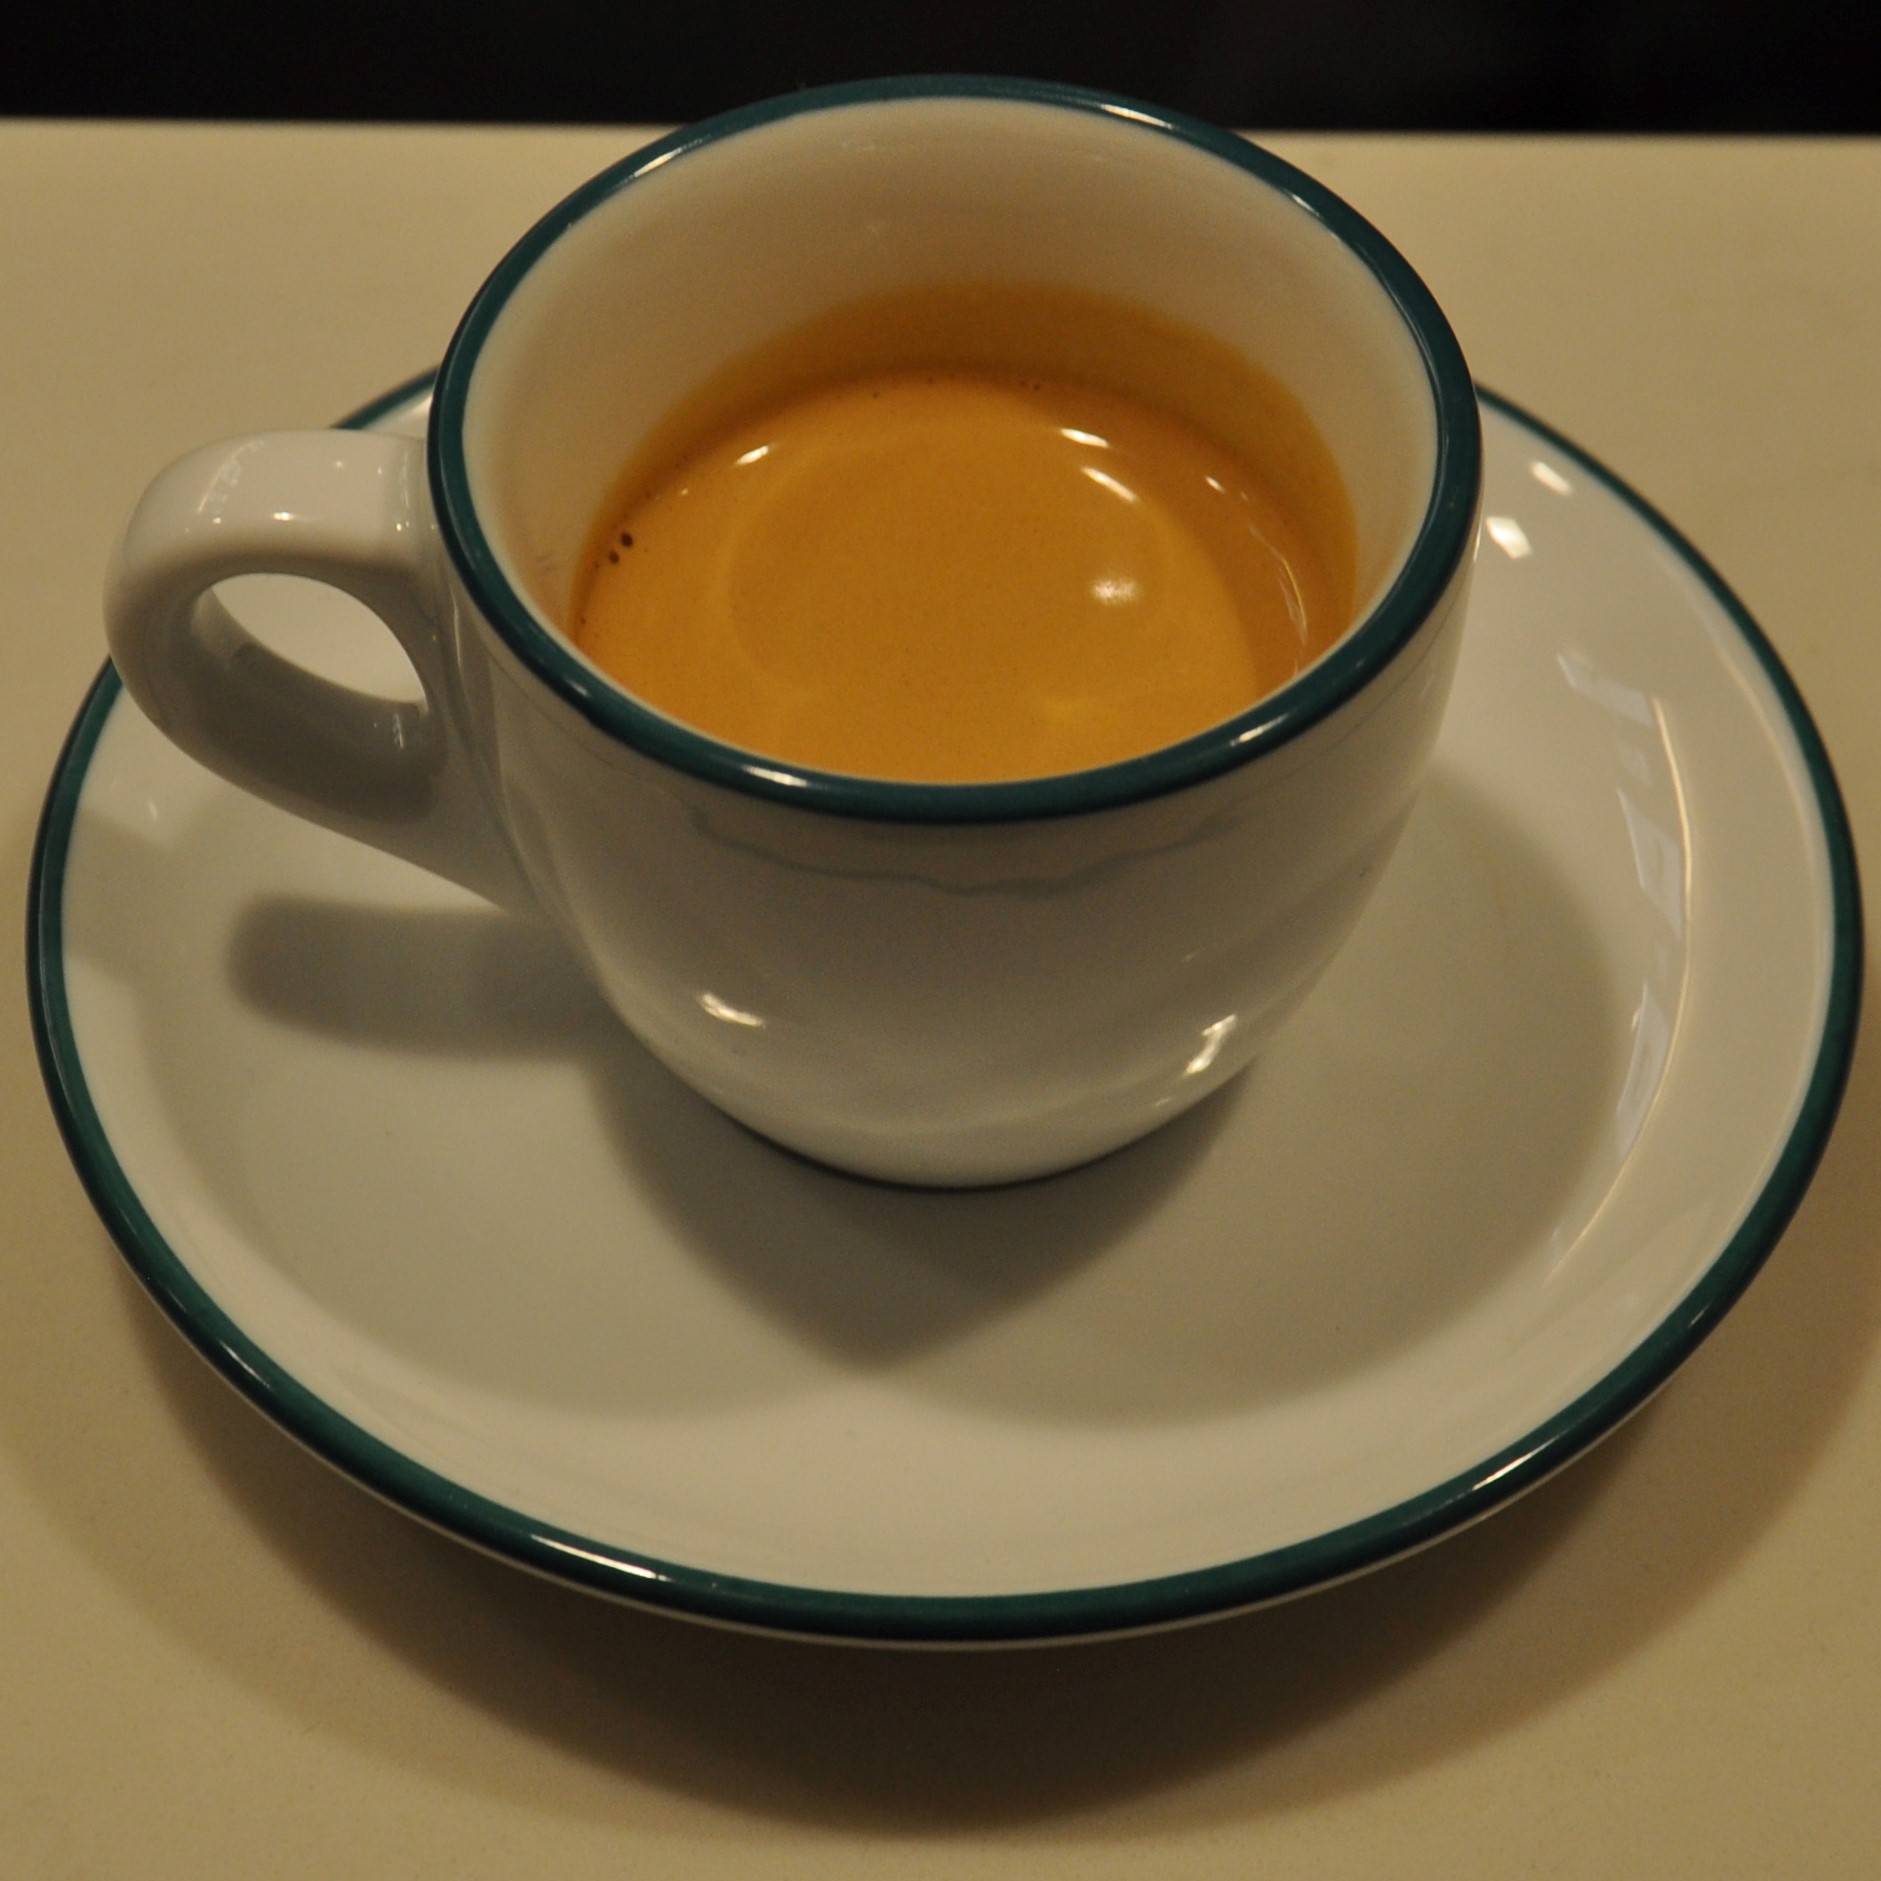 A lovely Verve espresso in a classic white cup, pulled at Infuse Coffee & Tea Bar in River North Point, Chicago.